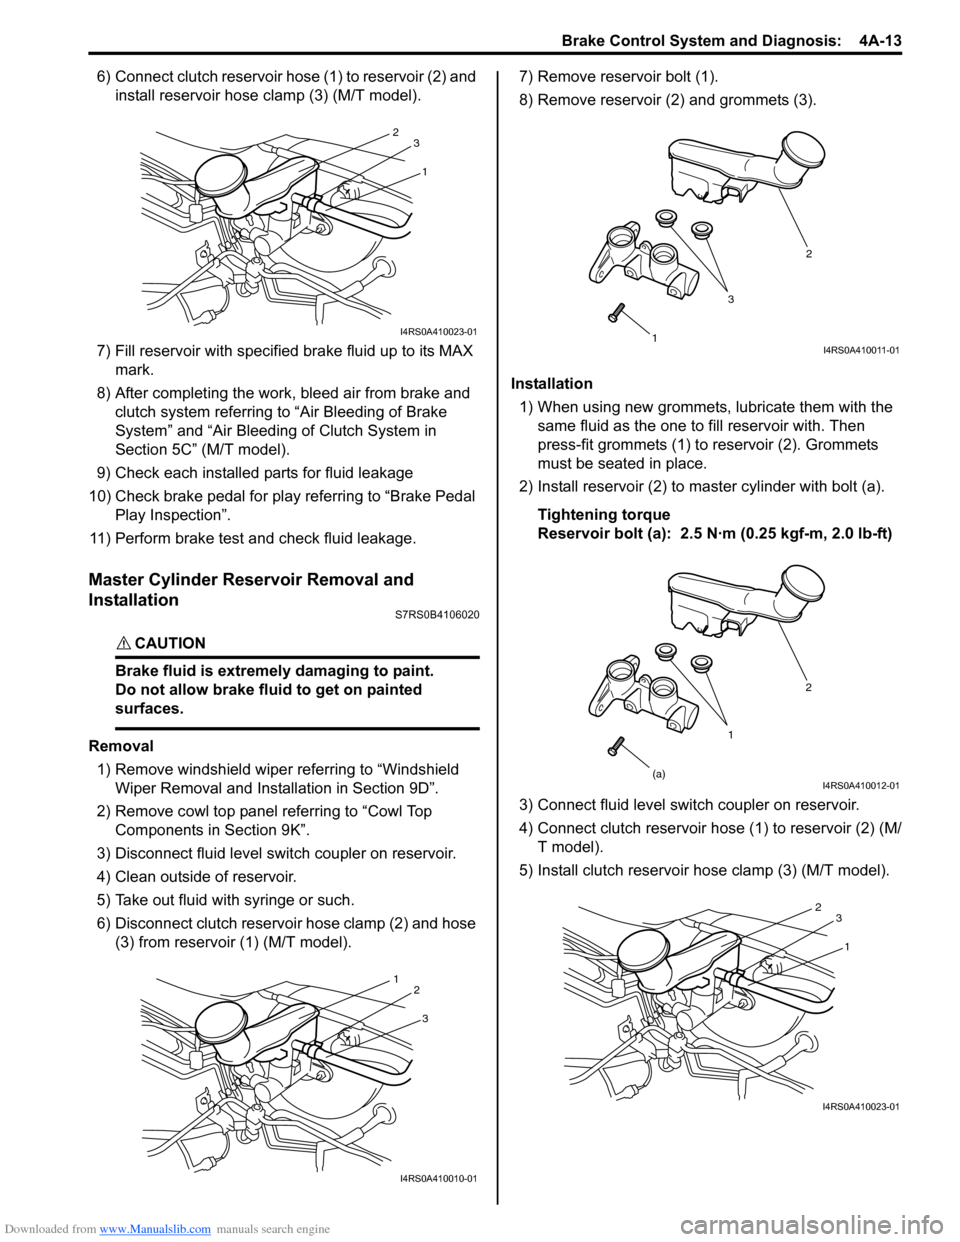 SUZUKI SWIFT 2007 2.G Service Workshop Manual Downloaded from www.Manualslib.com manuals search engine Brake Control System and Diagnosis:  4A-13
6) Connect clutch reservoir hose (1) to reservoir (2) and install reservoir hose clamp (3) (M/T mode